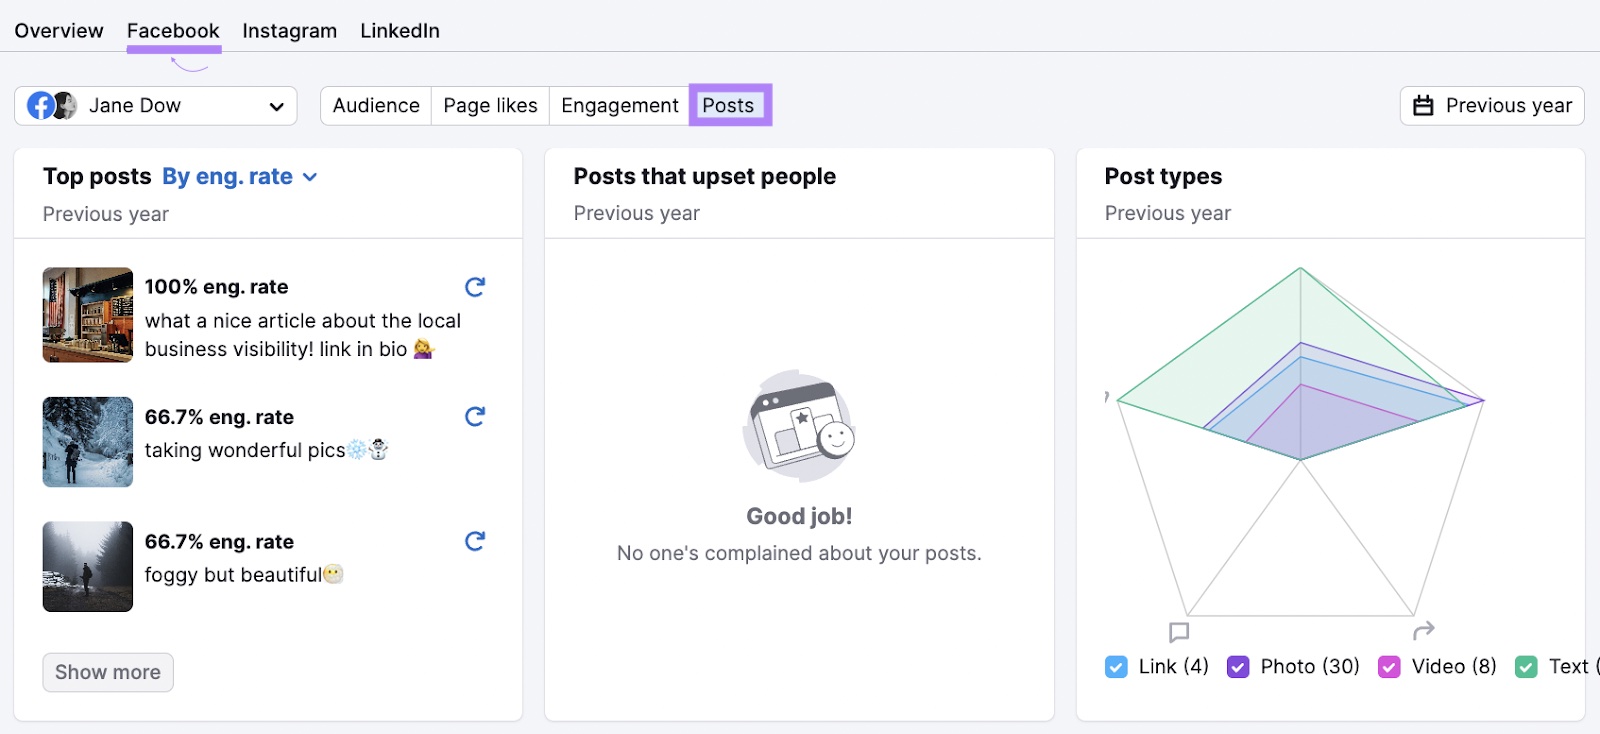 'Posts' tab for Facebook on Social Analytics showing top posts by engagement rate, posts that upset people and post types.